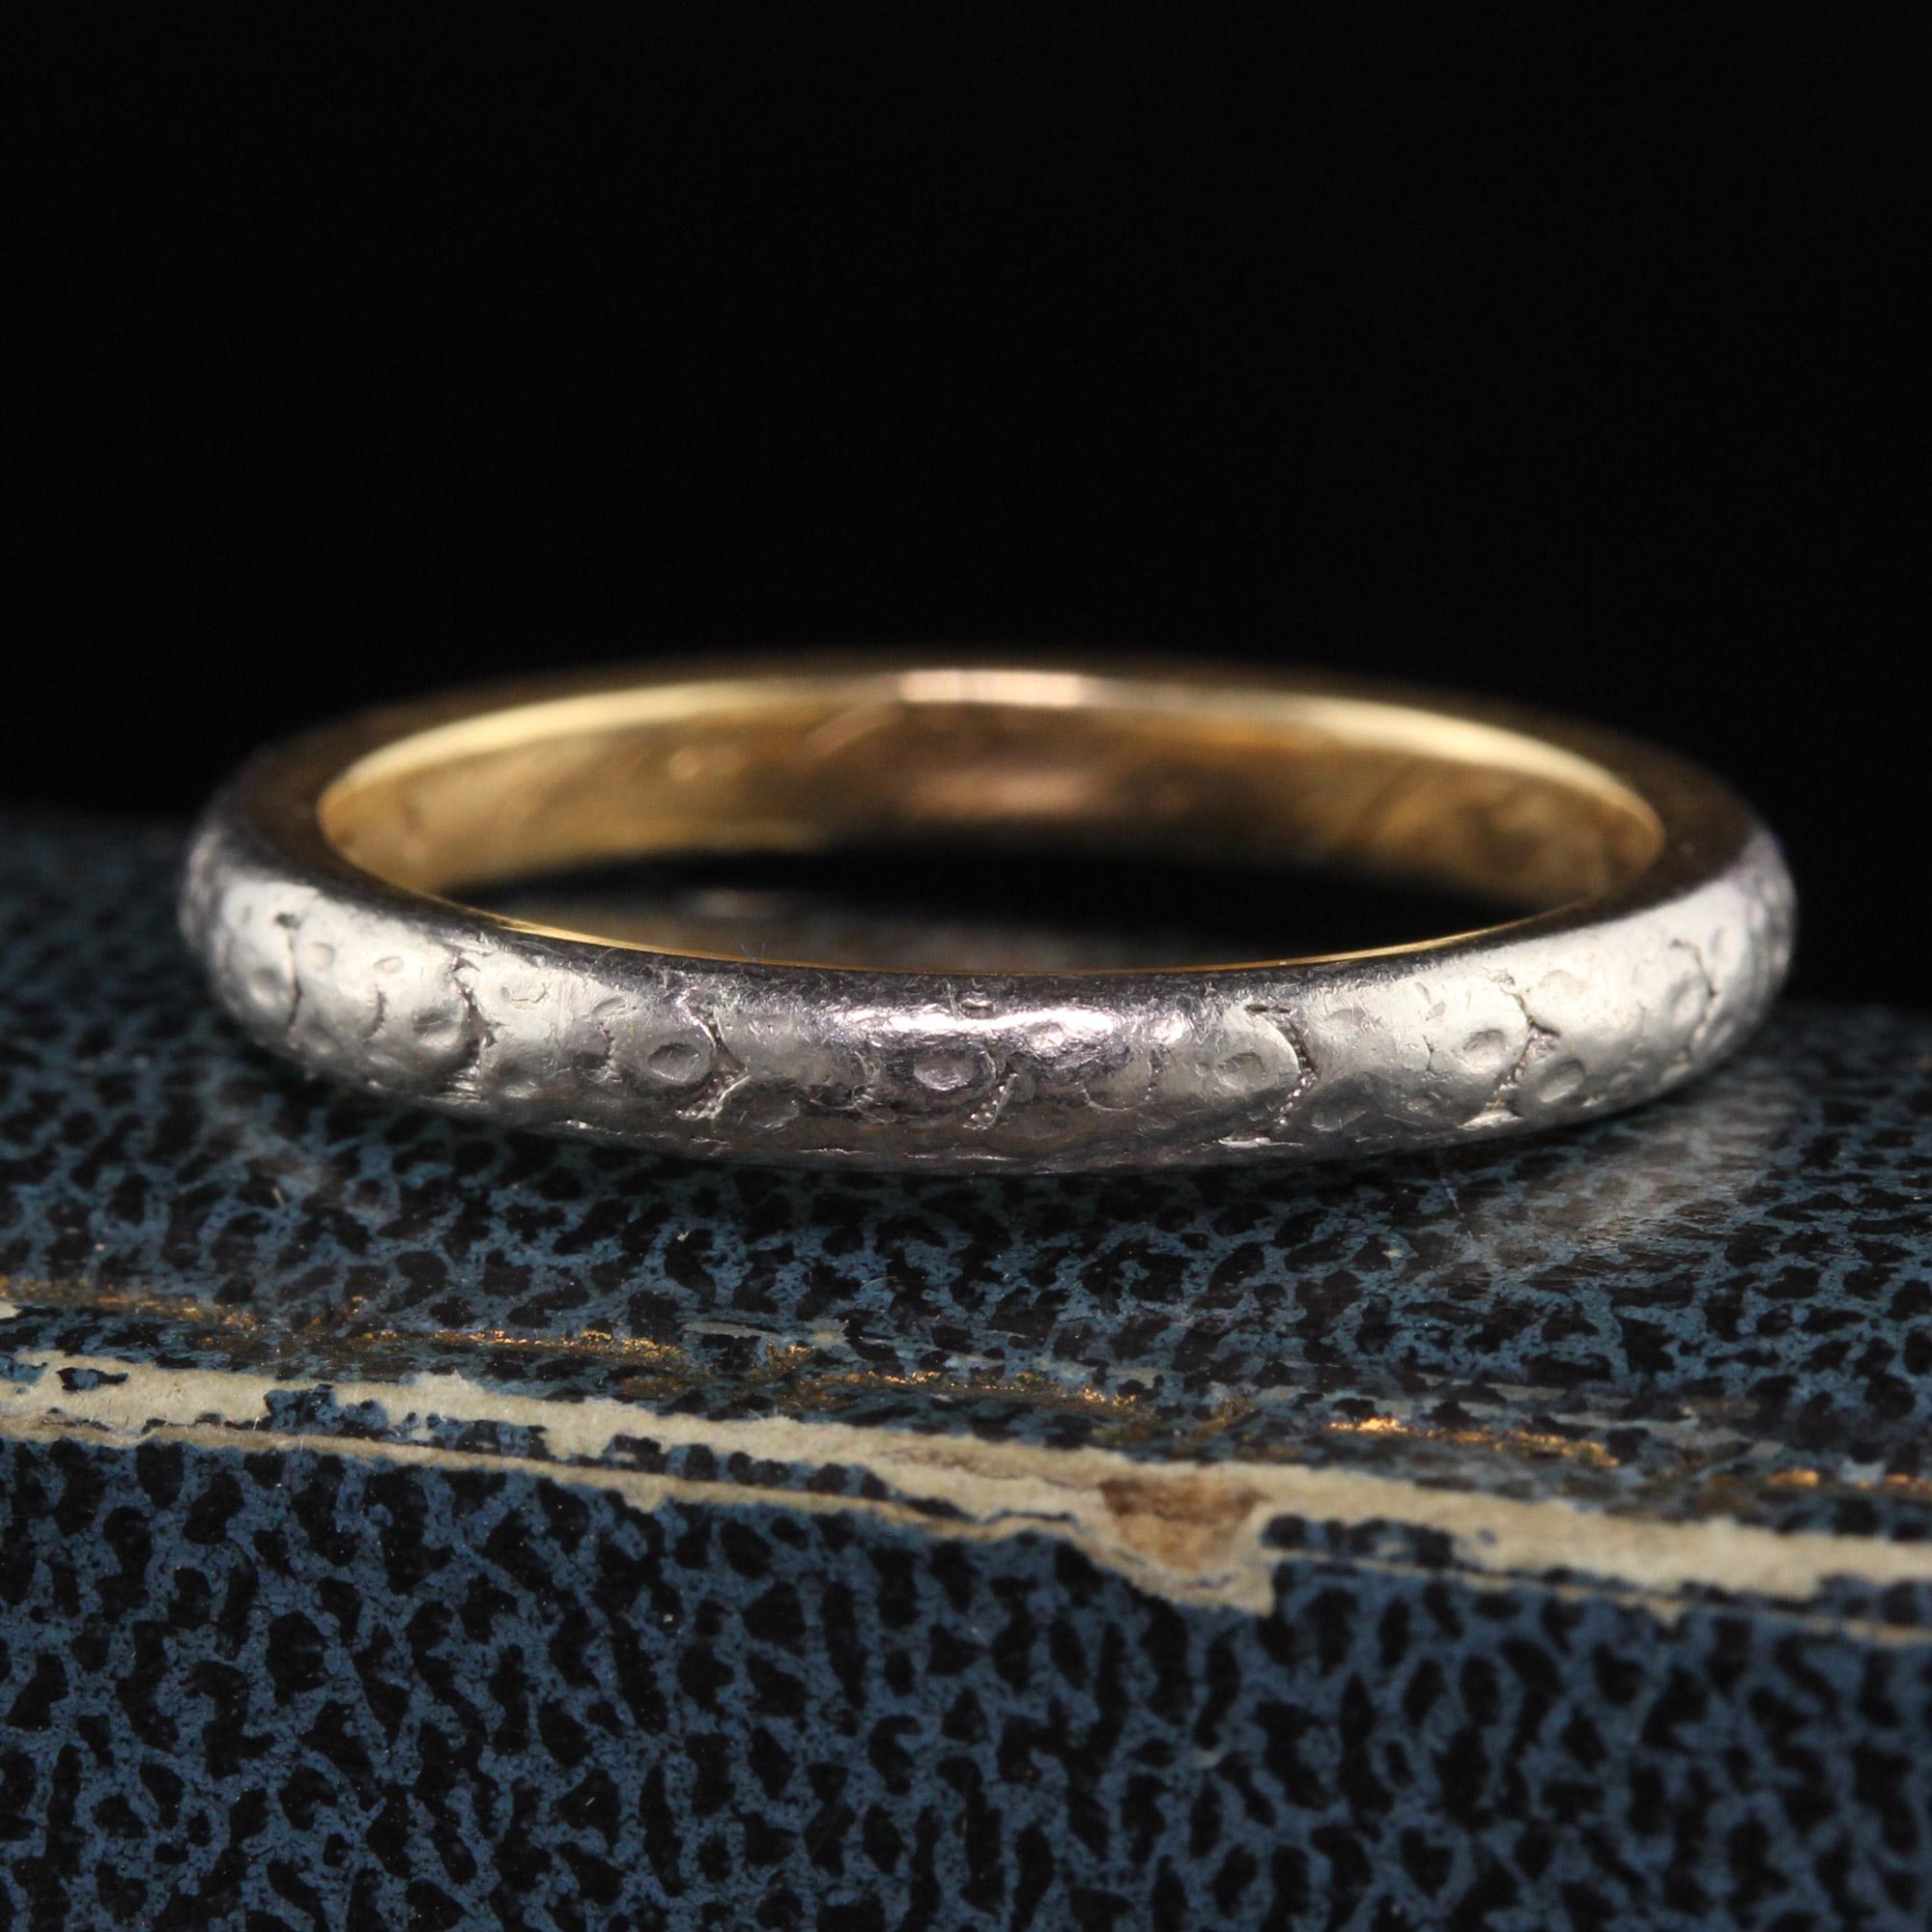 Beautiful Antique Art Deco 18K Yellow Gold and Platinum Engraved Wedding Band. This beautiful wedding band is crafted in 18k yellow gold and platinum. The band is engraved around the entire ring and has engravings inside the band that is worn and we